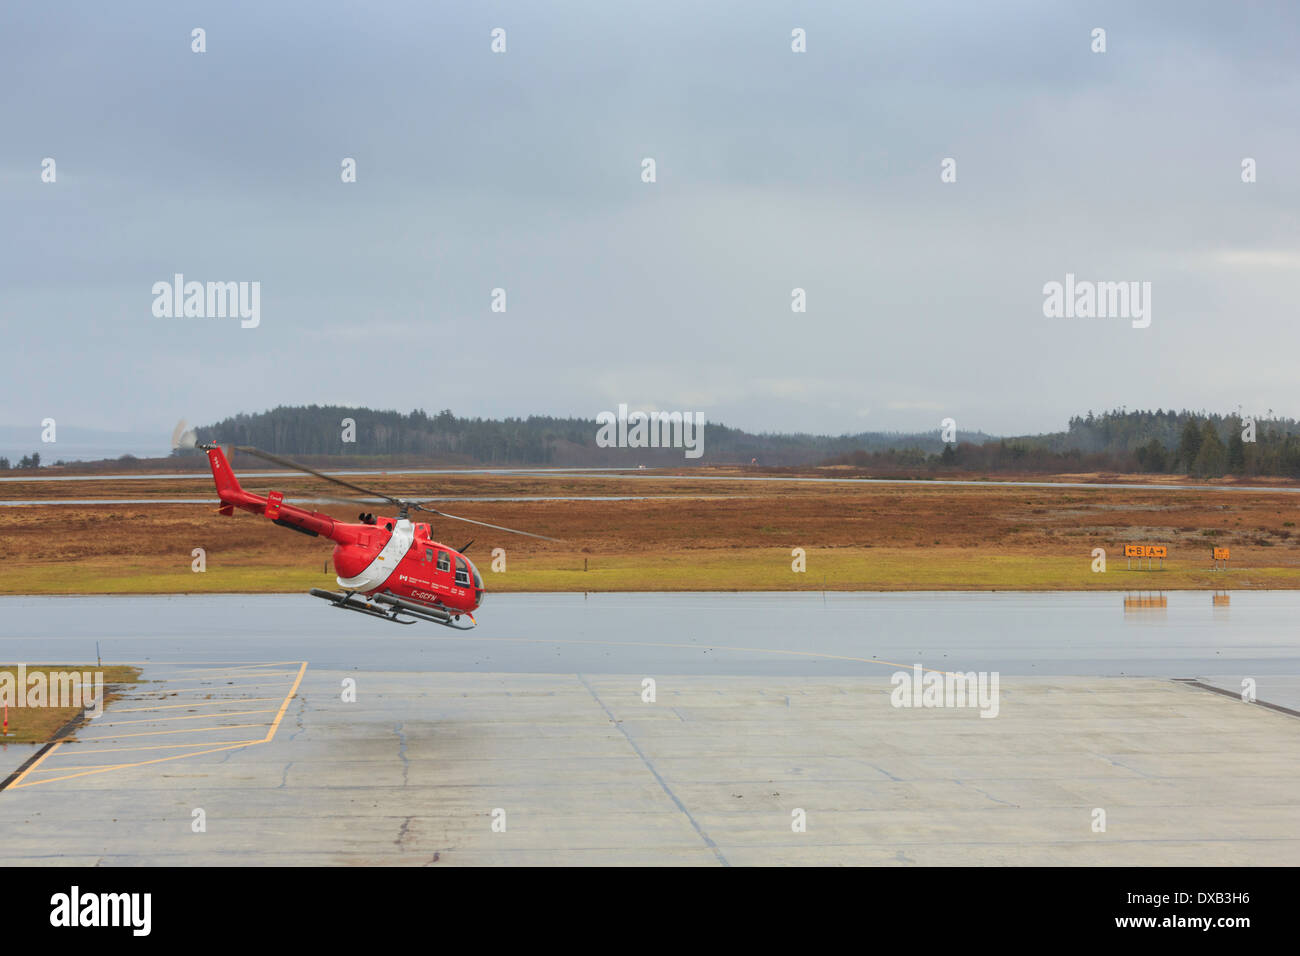 A Canadian Coast Guard helicopter lifts off at Port Hardy Airport in British Columbia Canada. Stock Photo